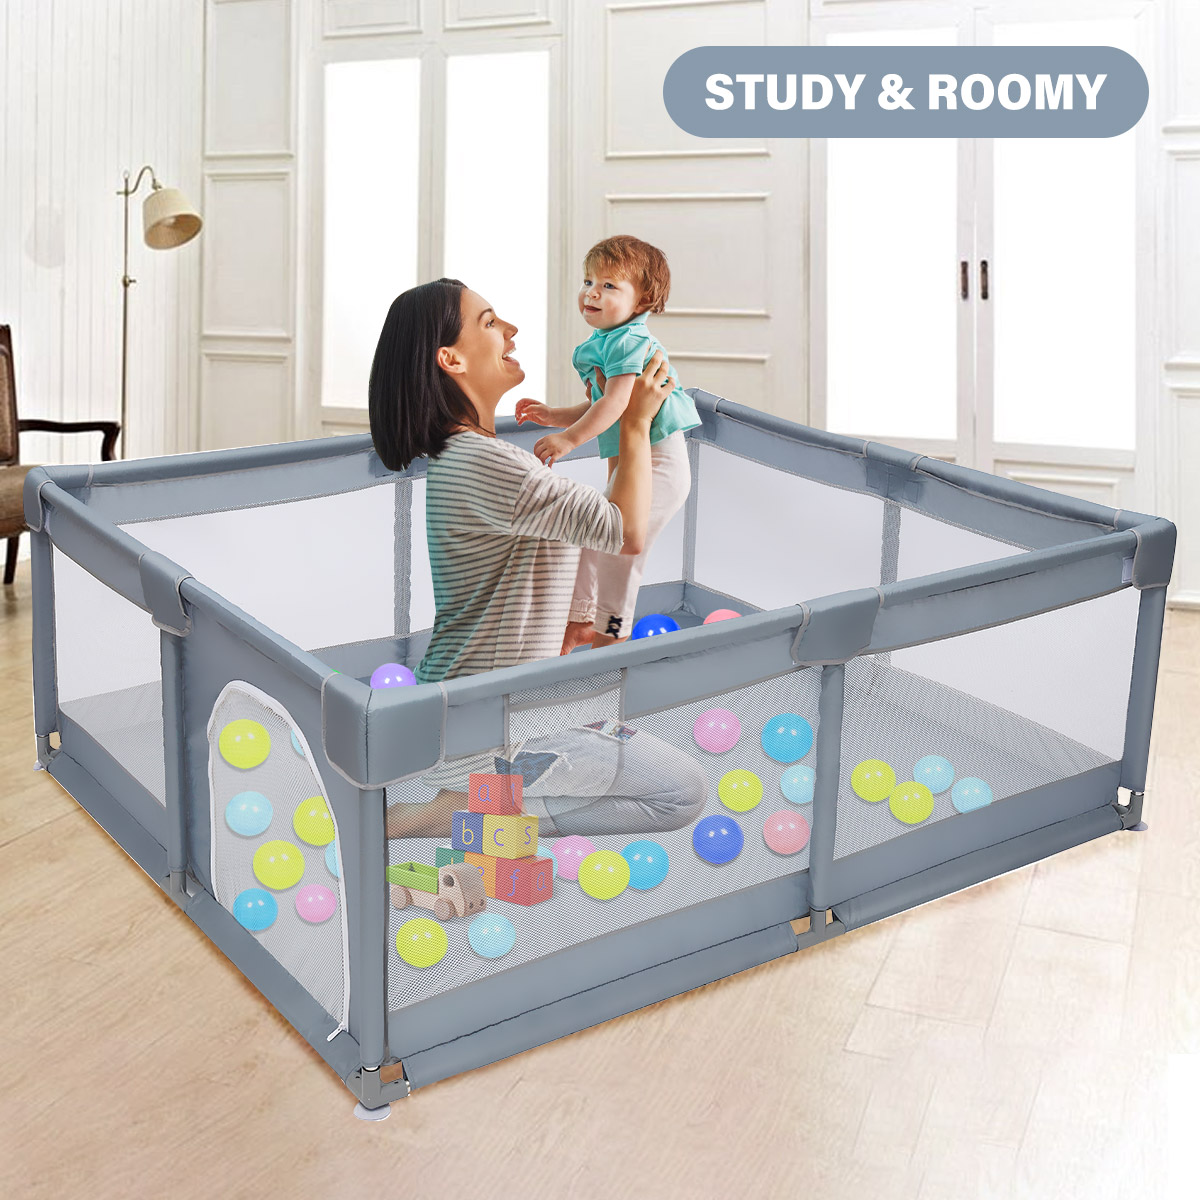 79-Baby-Playpen-Infants-Toddler-Safety-Kids-Packable--Portable-Play-Pens-Activity-Play-Yard-Gate-for-1935215-3